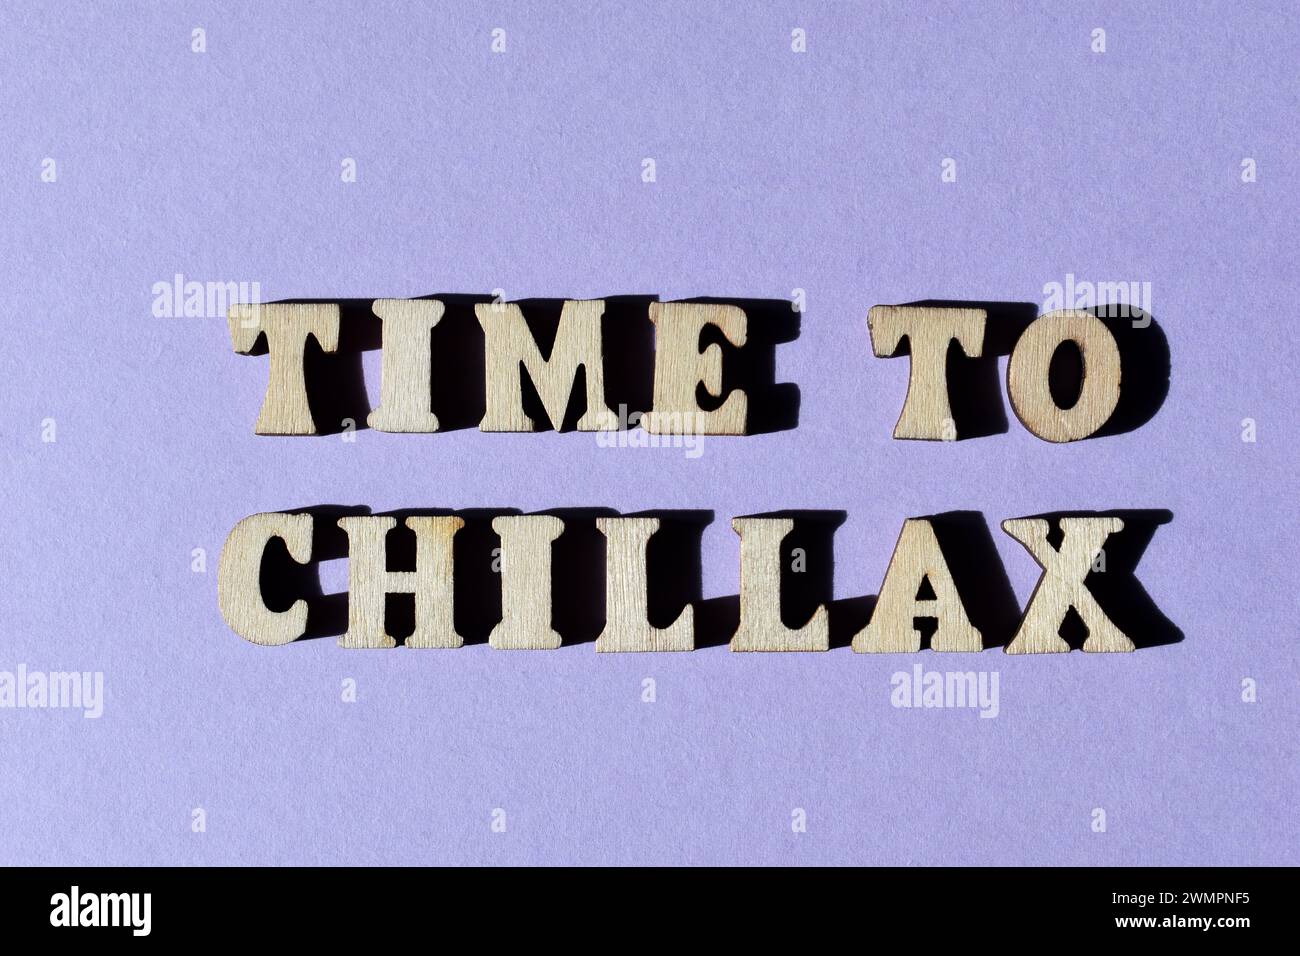 Time To Chillax, a word combination of Chill and Relax, known as a portmanteau, in wooden alphabet letters isolated on purple background Stock Photo